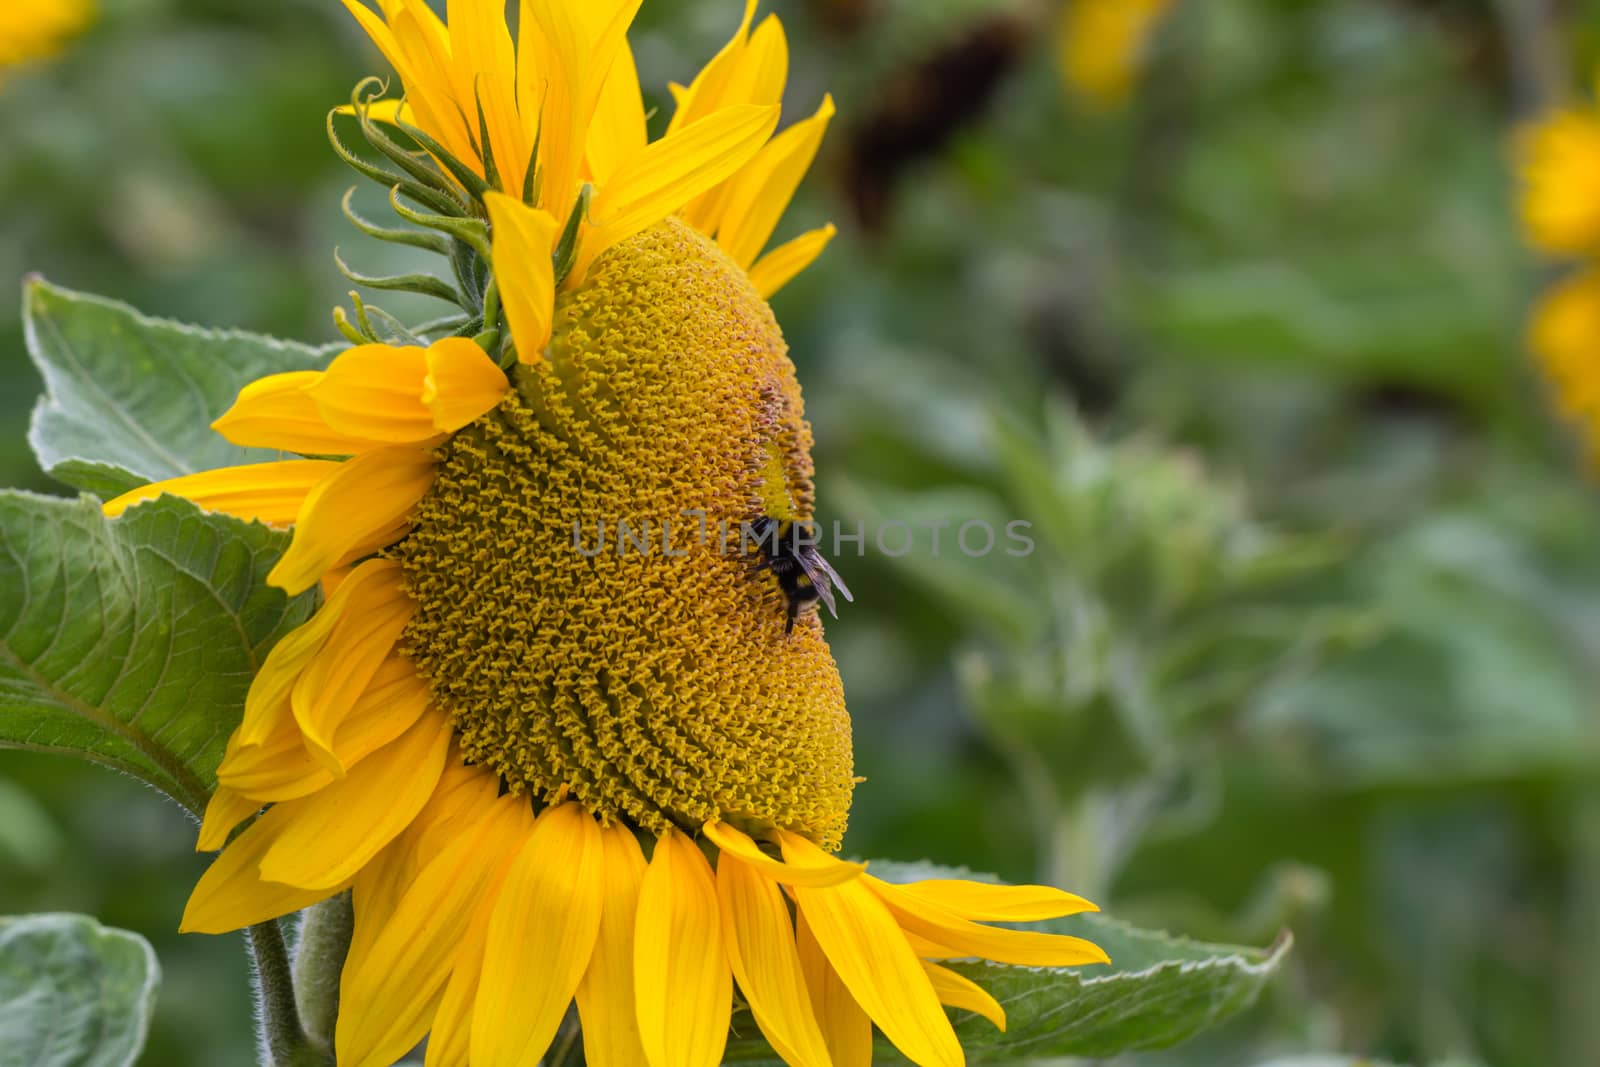 Detailed image of a bee on a sunflower plant